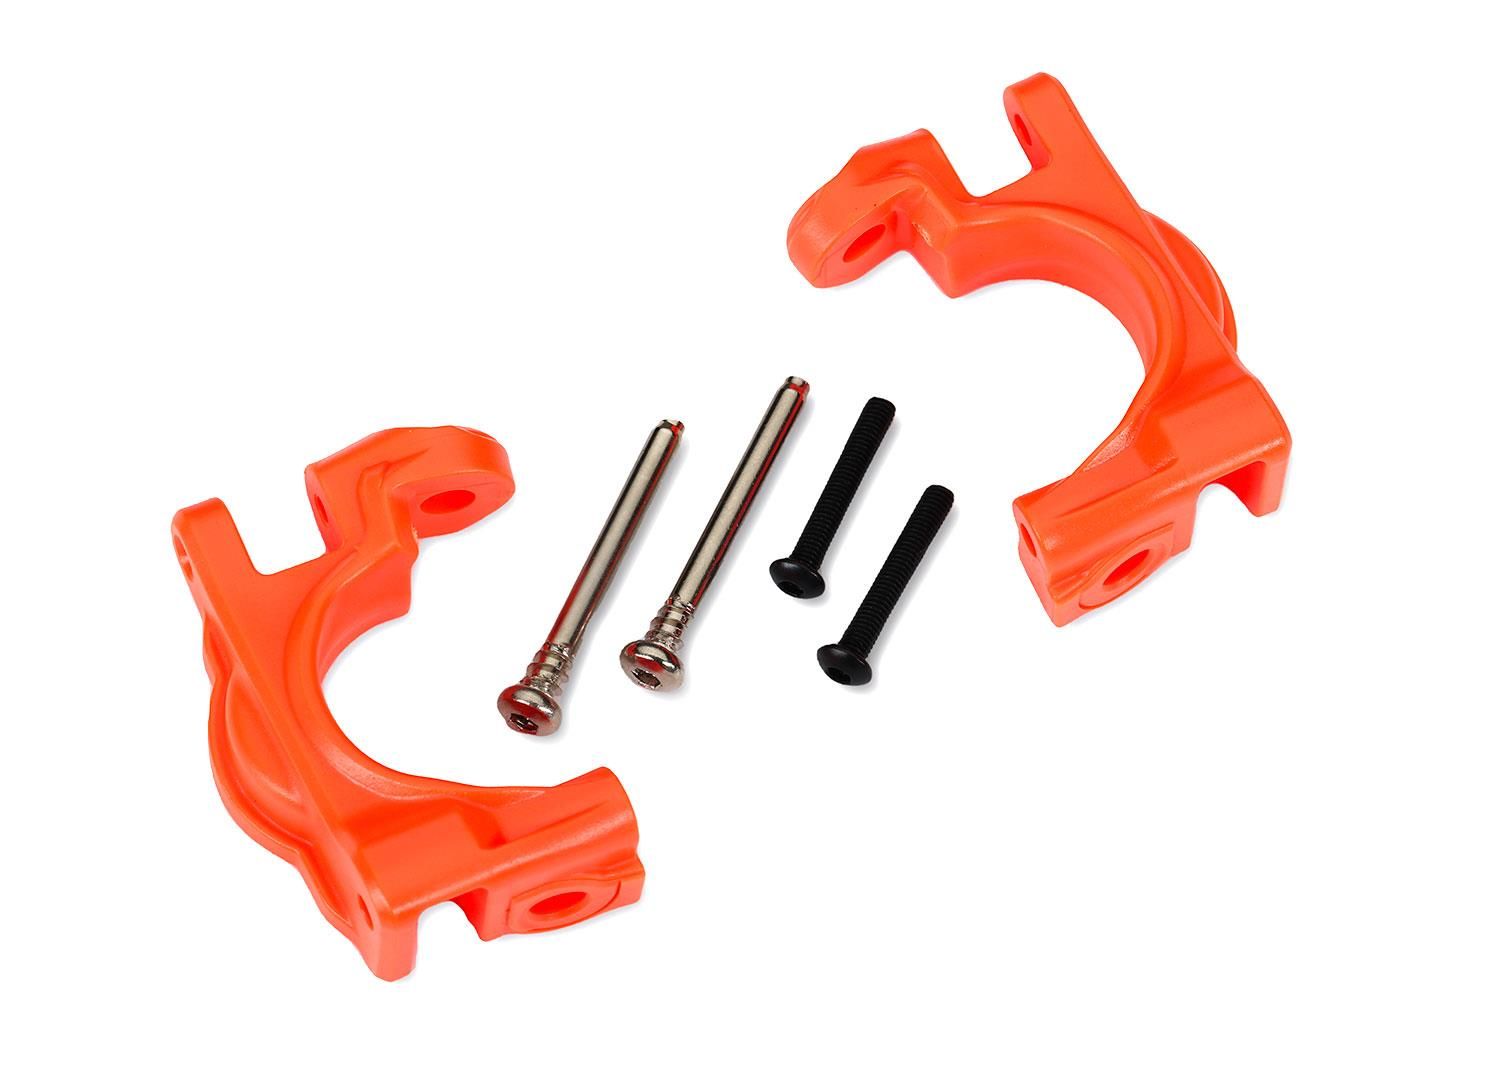 Traxxas - Caster Blocks Left/Right (for use with #9080 upgrade kit) - Orange (TRX-9032T)